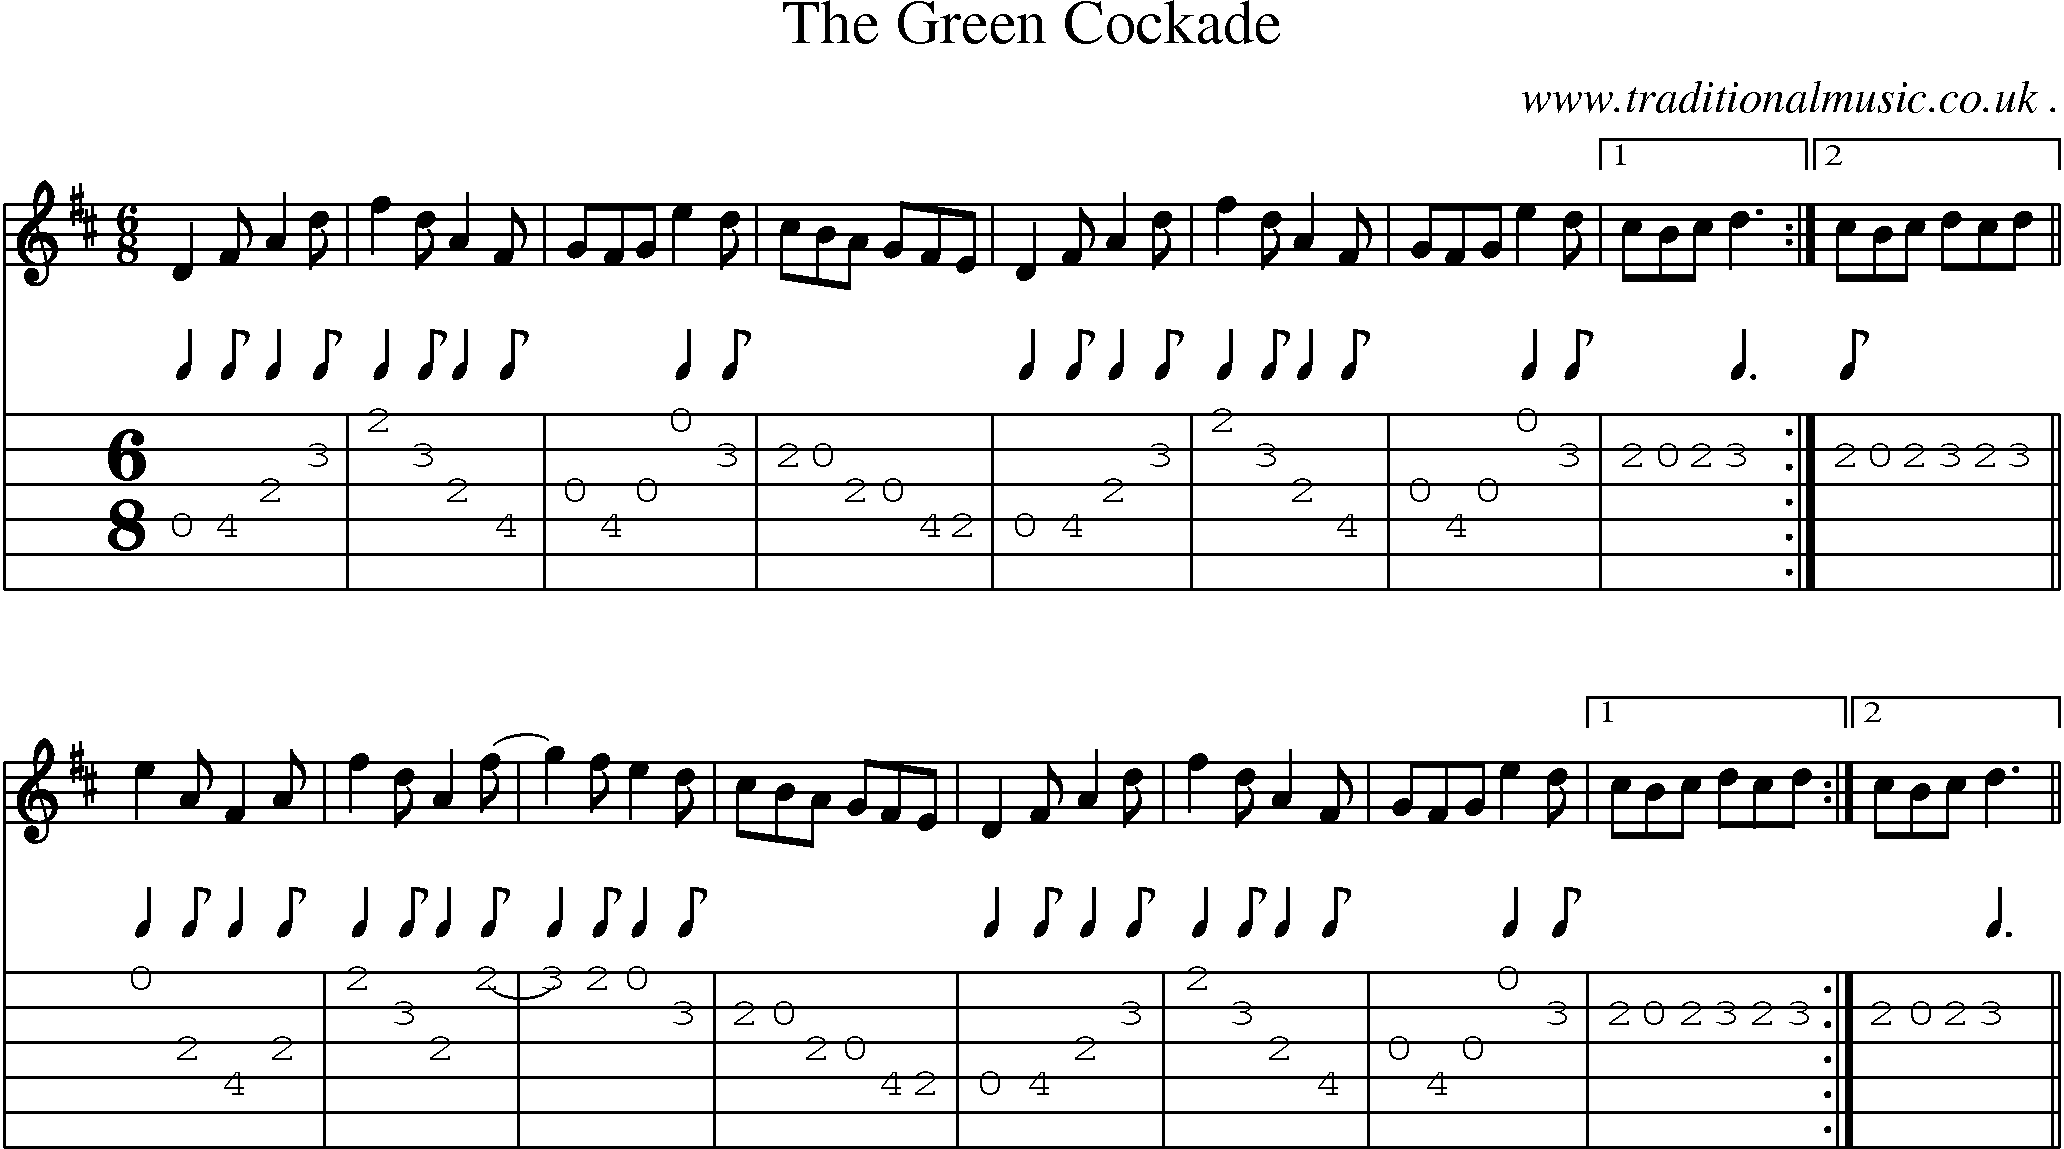 Music Score and Guitar Tabs for The Green Cockade